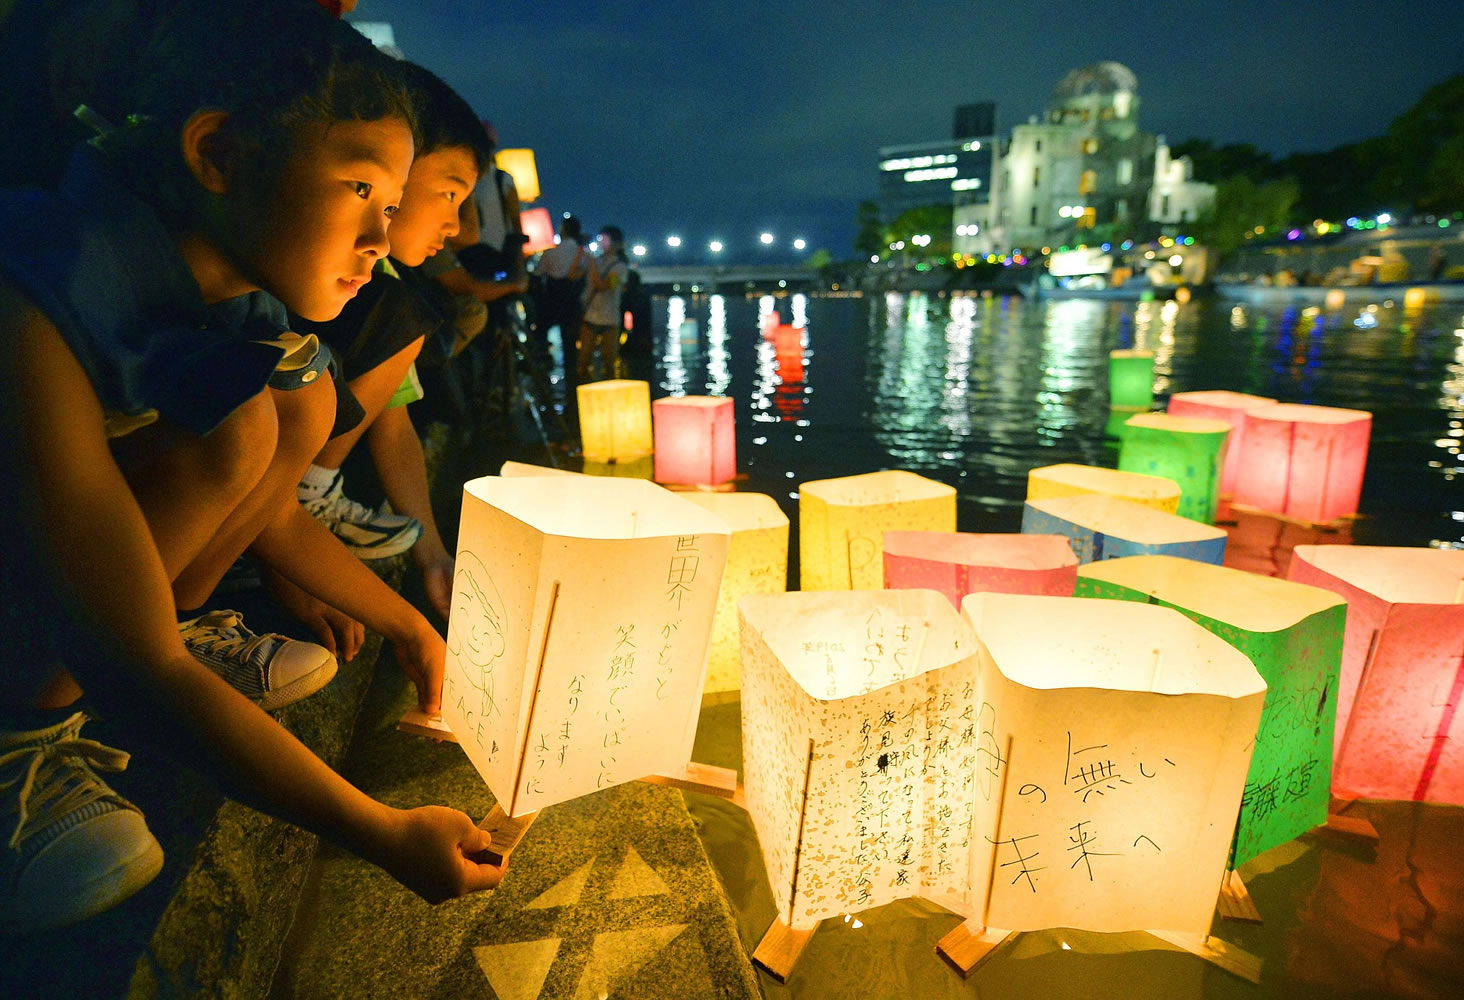 Kyodo News/Associated Press
A girl prepares to release paper lanterns with messages of peace on them Wednesday in the Motoyasu River near the Atomic Bomb Dome in Hiroshima, Japan.